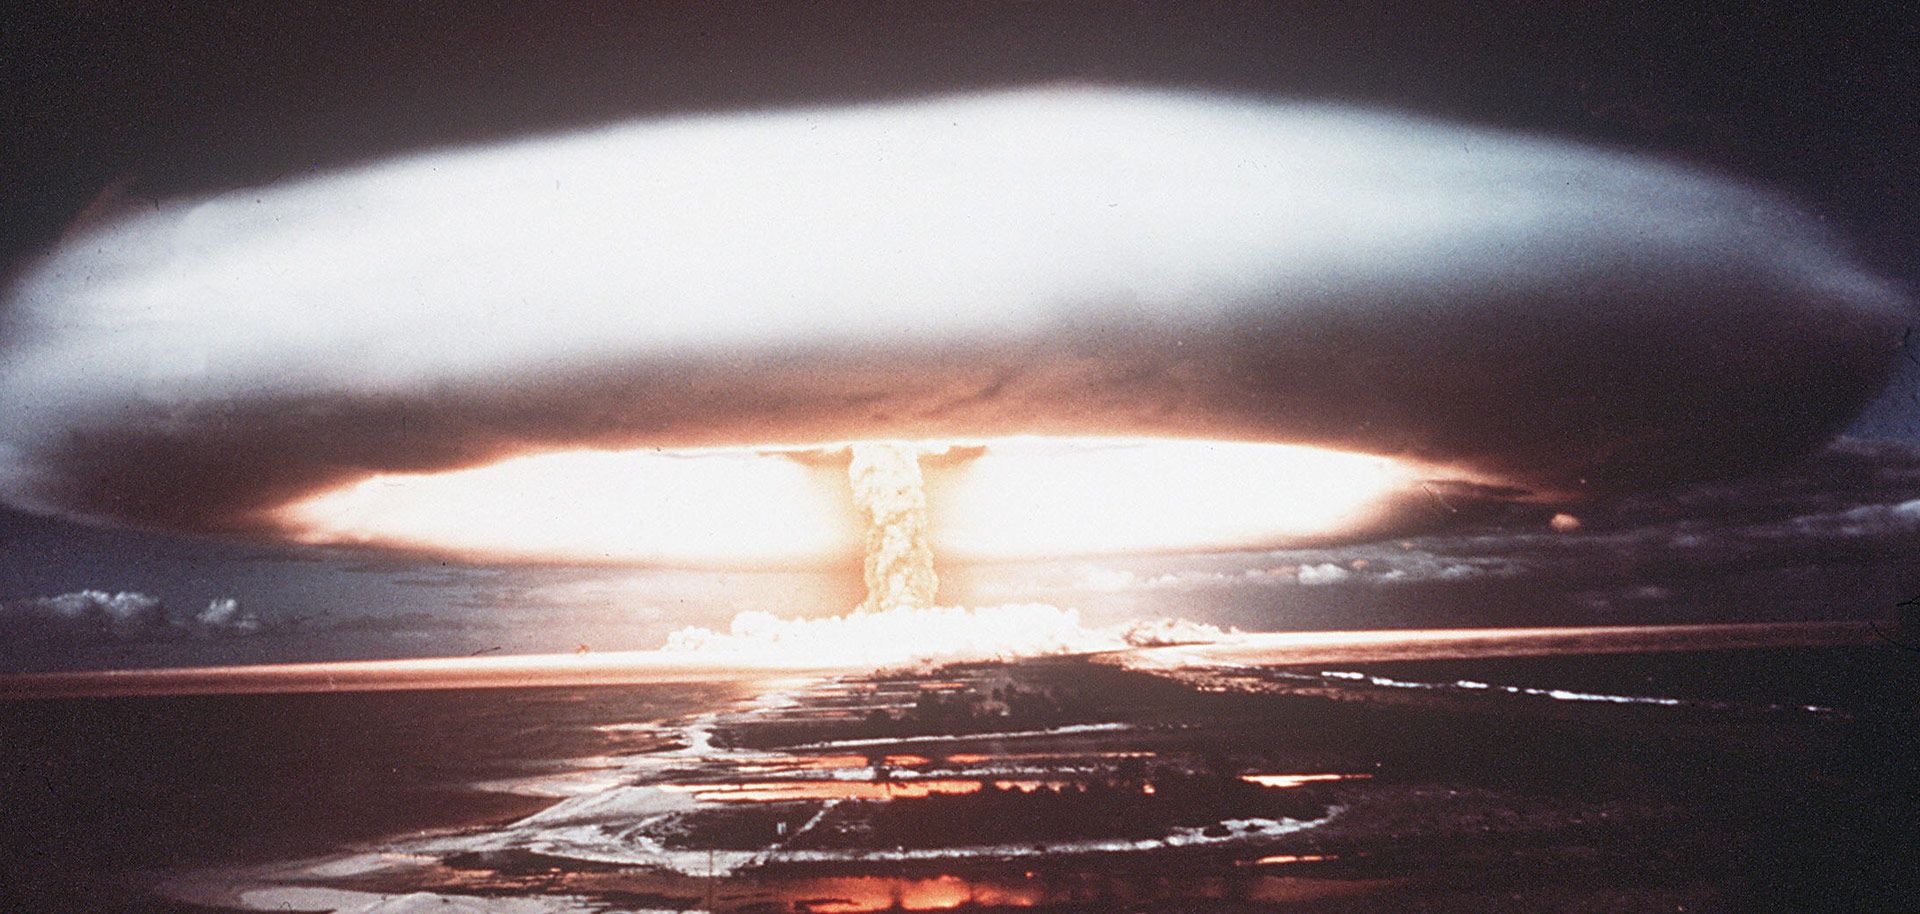 A picture from 1971 shows a nuclear explosion in Mururoa atoll.